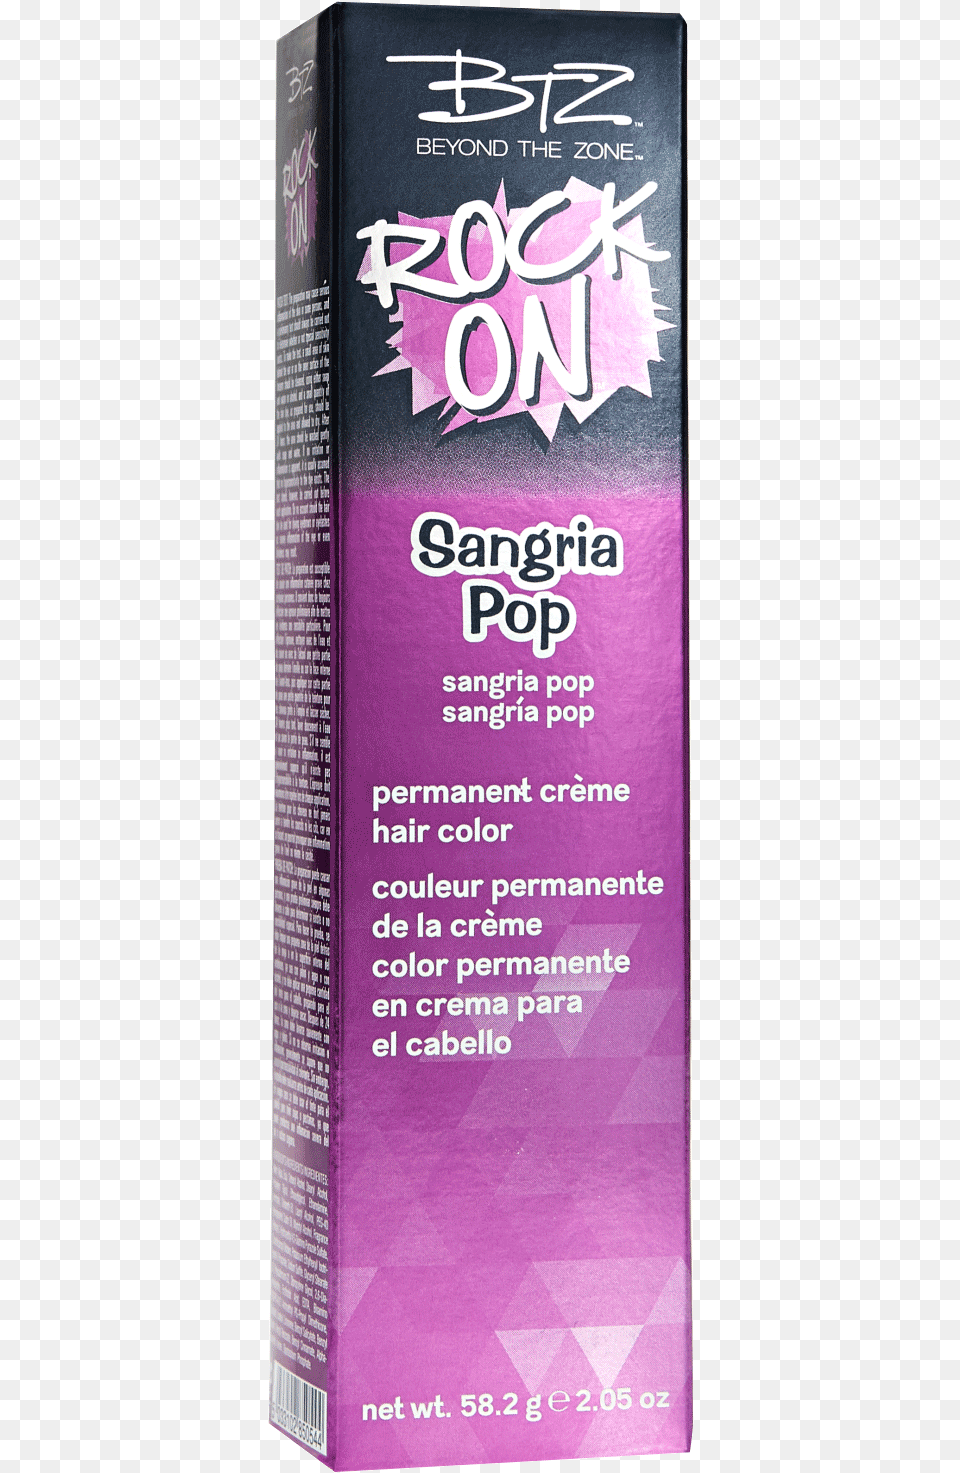 Beyond The Zone Sangria Pop Permanent Creme Hair Color Sangria Pop Beyond The Zone, Book, Publication, Advertisement, Poster Png